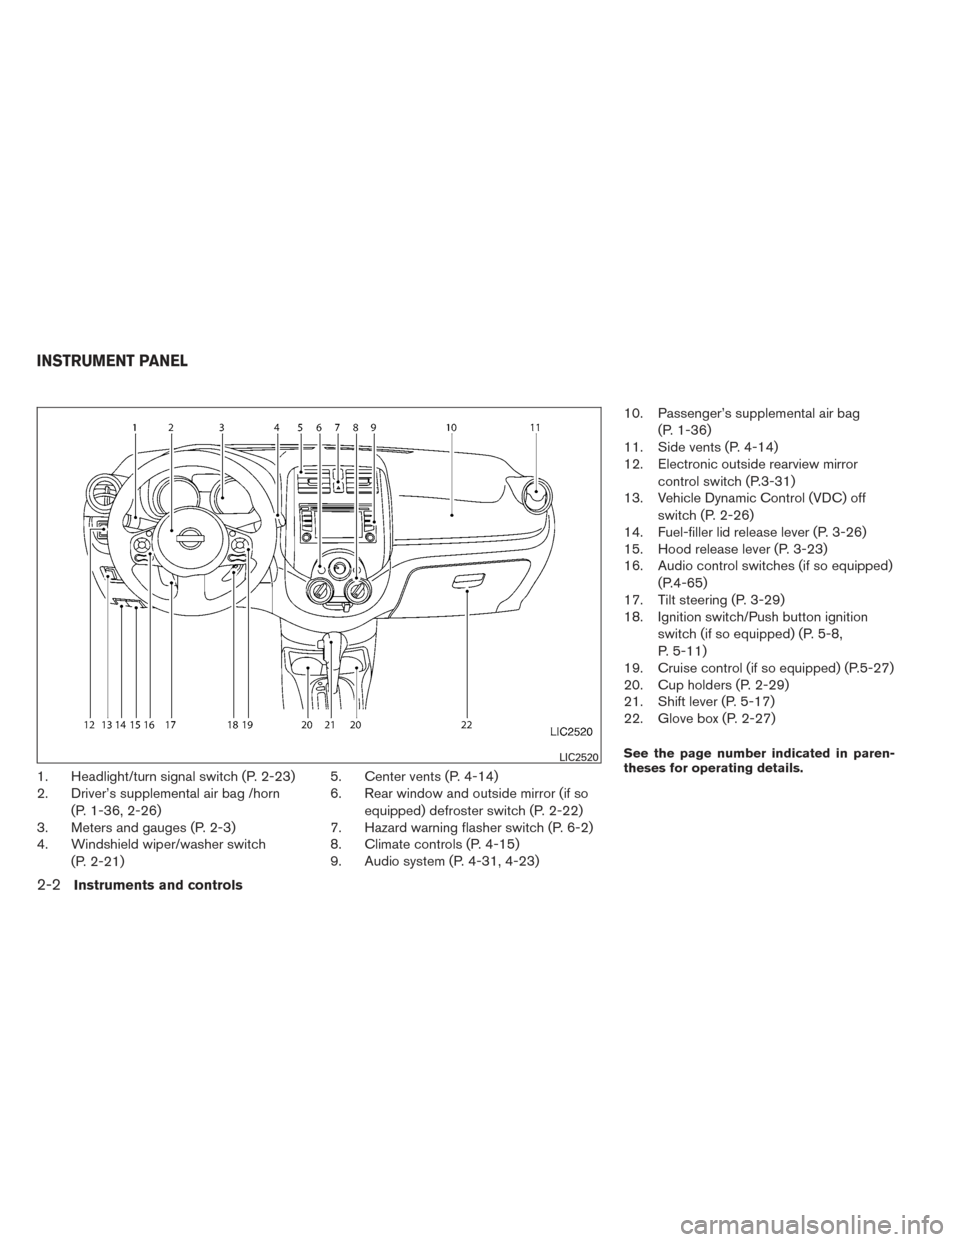 NISSAN VERSA SEDAN 2014 2.G Manual PDF 1. Headlight/turn signal switch (P. 2-23)
2. Driver’s supplemental air bag /horn(P. 1-36, 2-26)
3. Meters and gauges (P. 2-3)
4. Windshield wiper/washer switch
(P. 2-21) 5. Center vents (P. 4-14)
6.